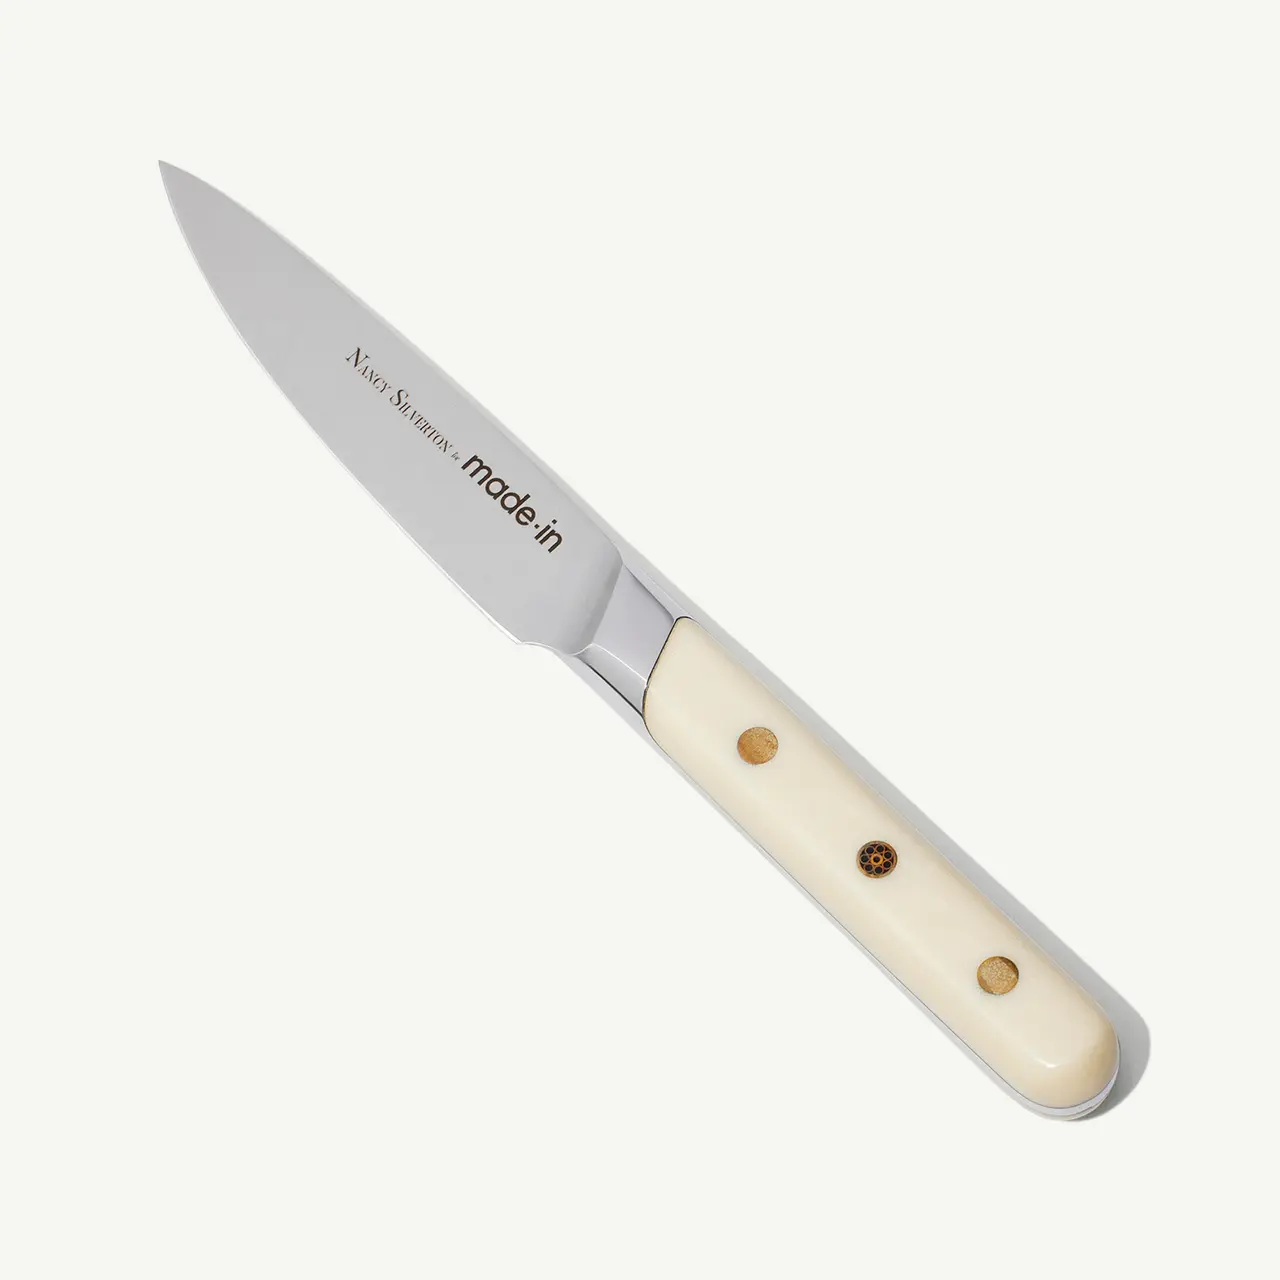 A sleek kitchen knife with a white handle and "Made In" text on its blade, isolated on a white background.